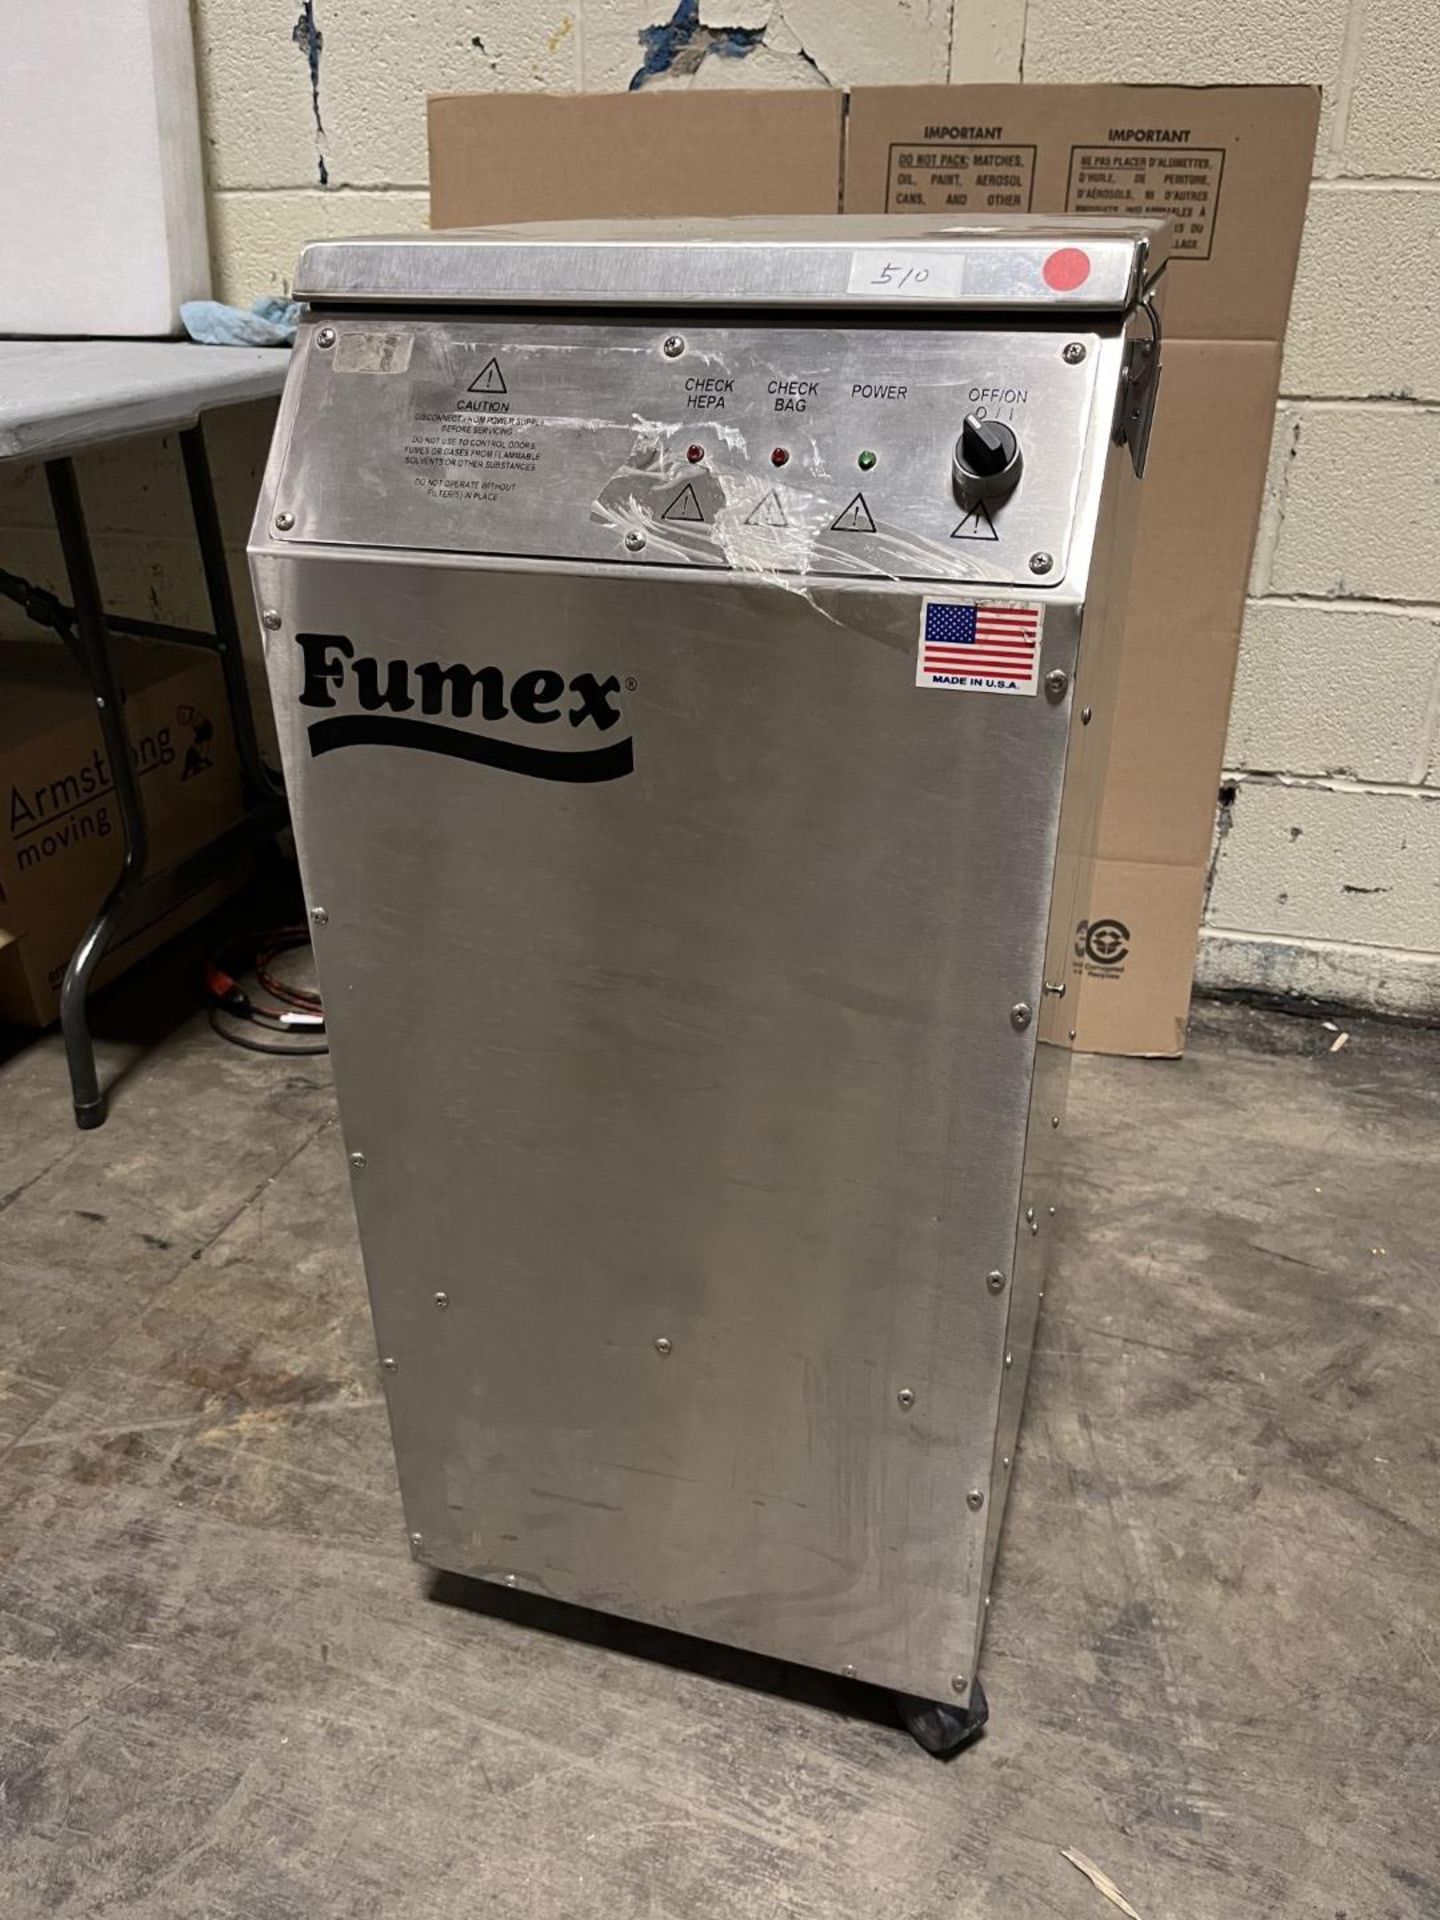 Fumex Fume Extractor Air Filtration System, Model FA2SS